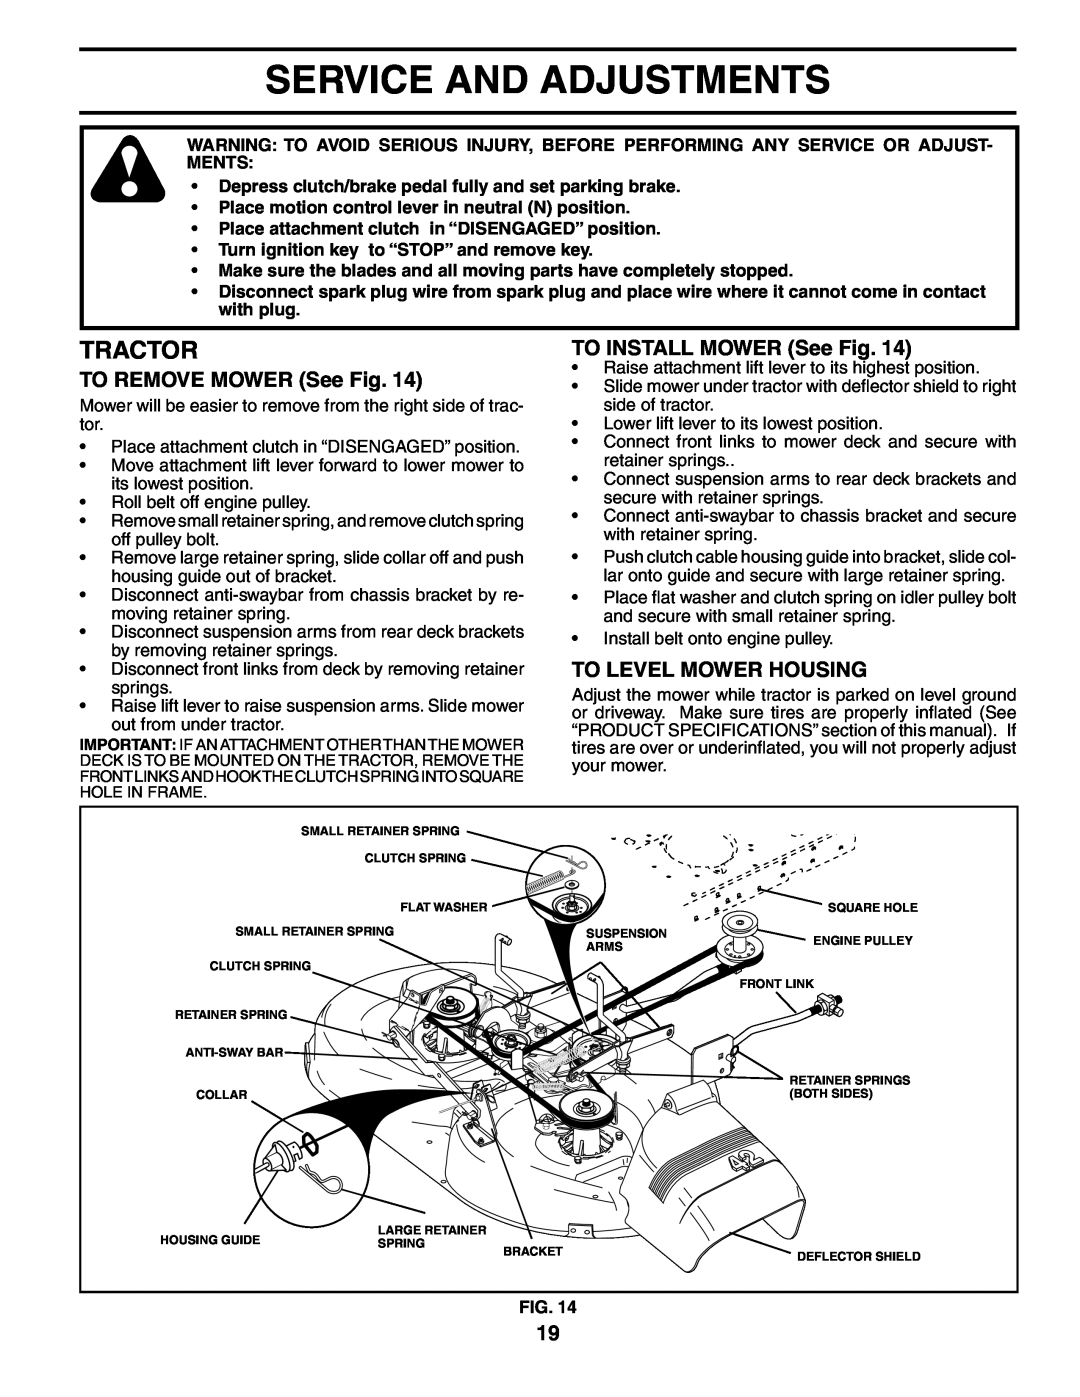 Poulan 195620 Service And Adjustments, TO REMOVE MOWER See Fig, TO INSTALL MOWER See Fig, To Level Mower Housing, Tractor 